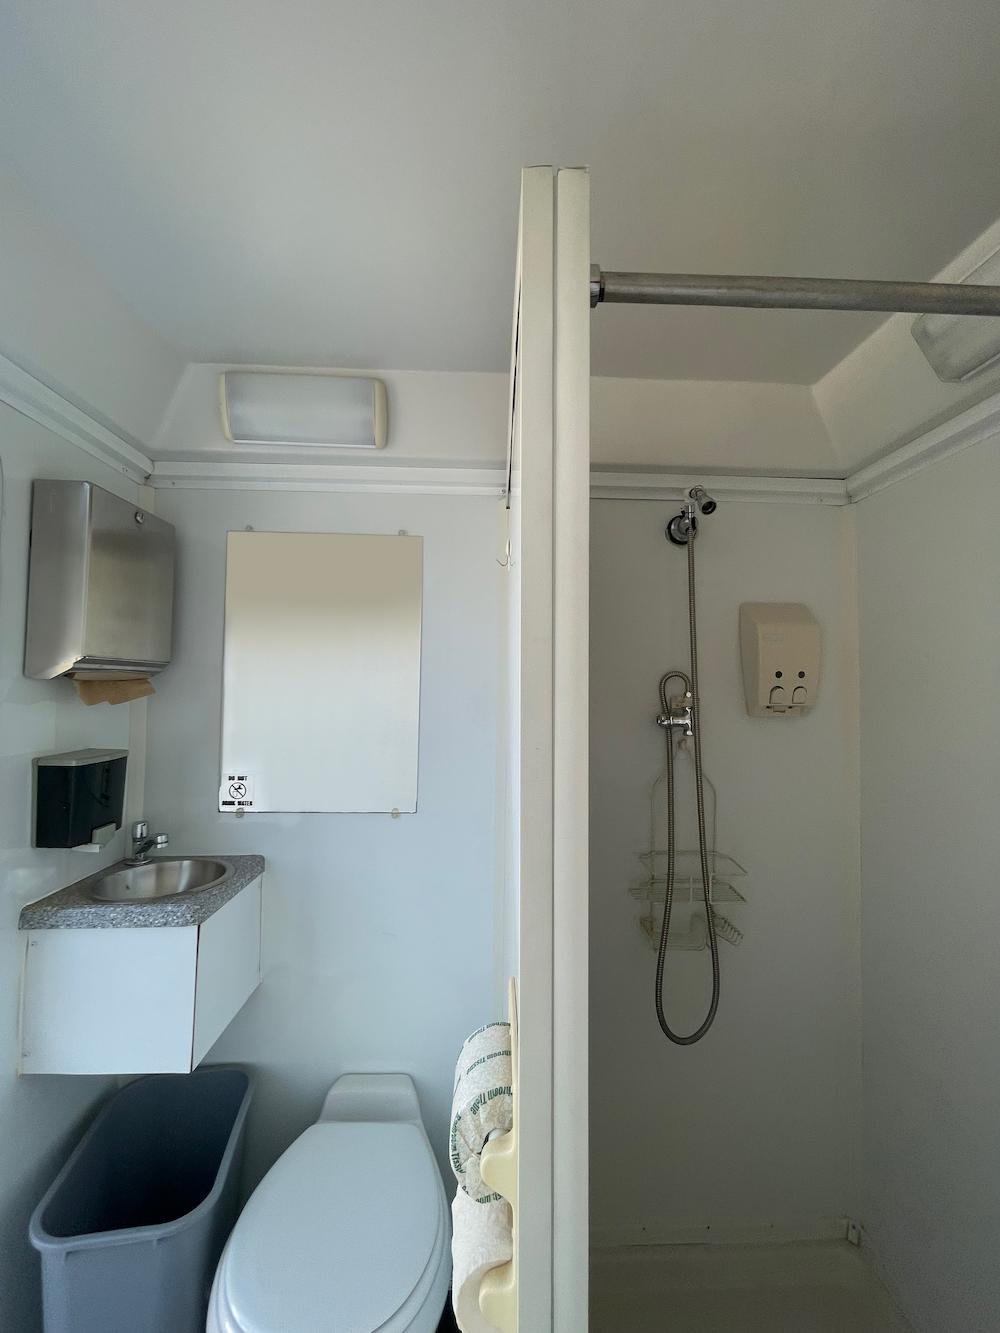 Restroom and Shower Combo Trailer Interior